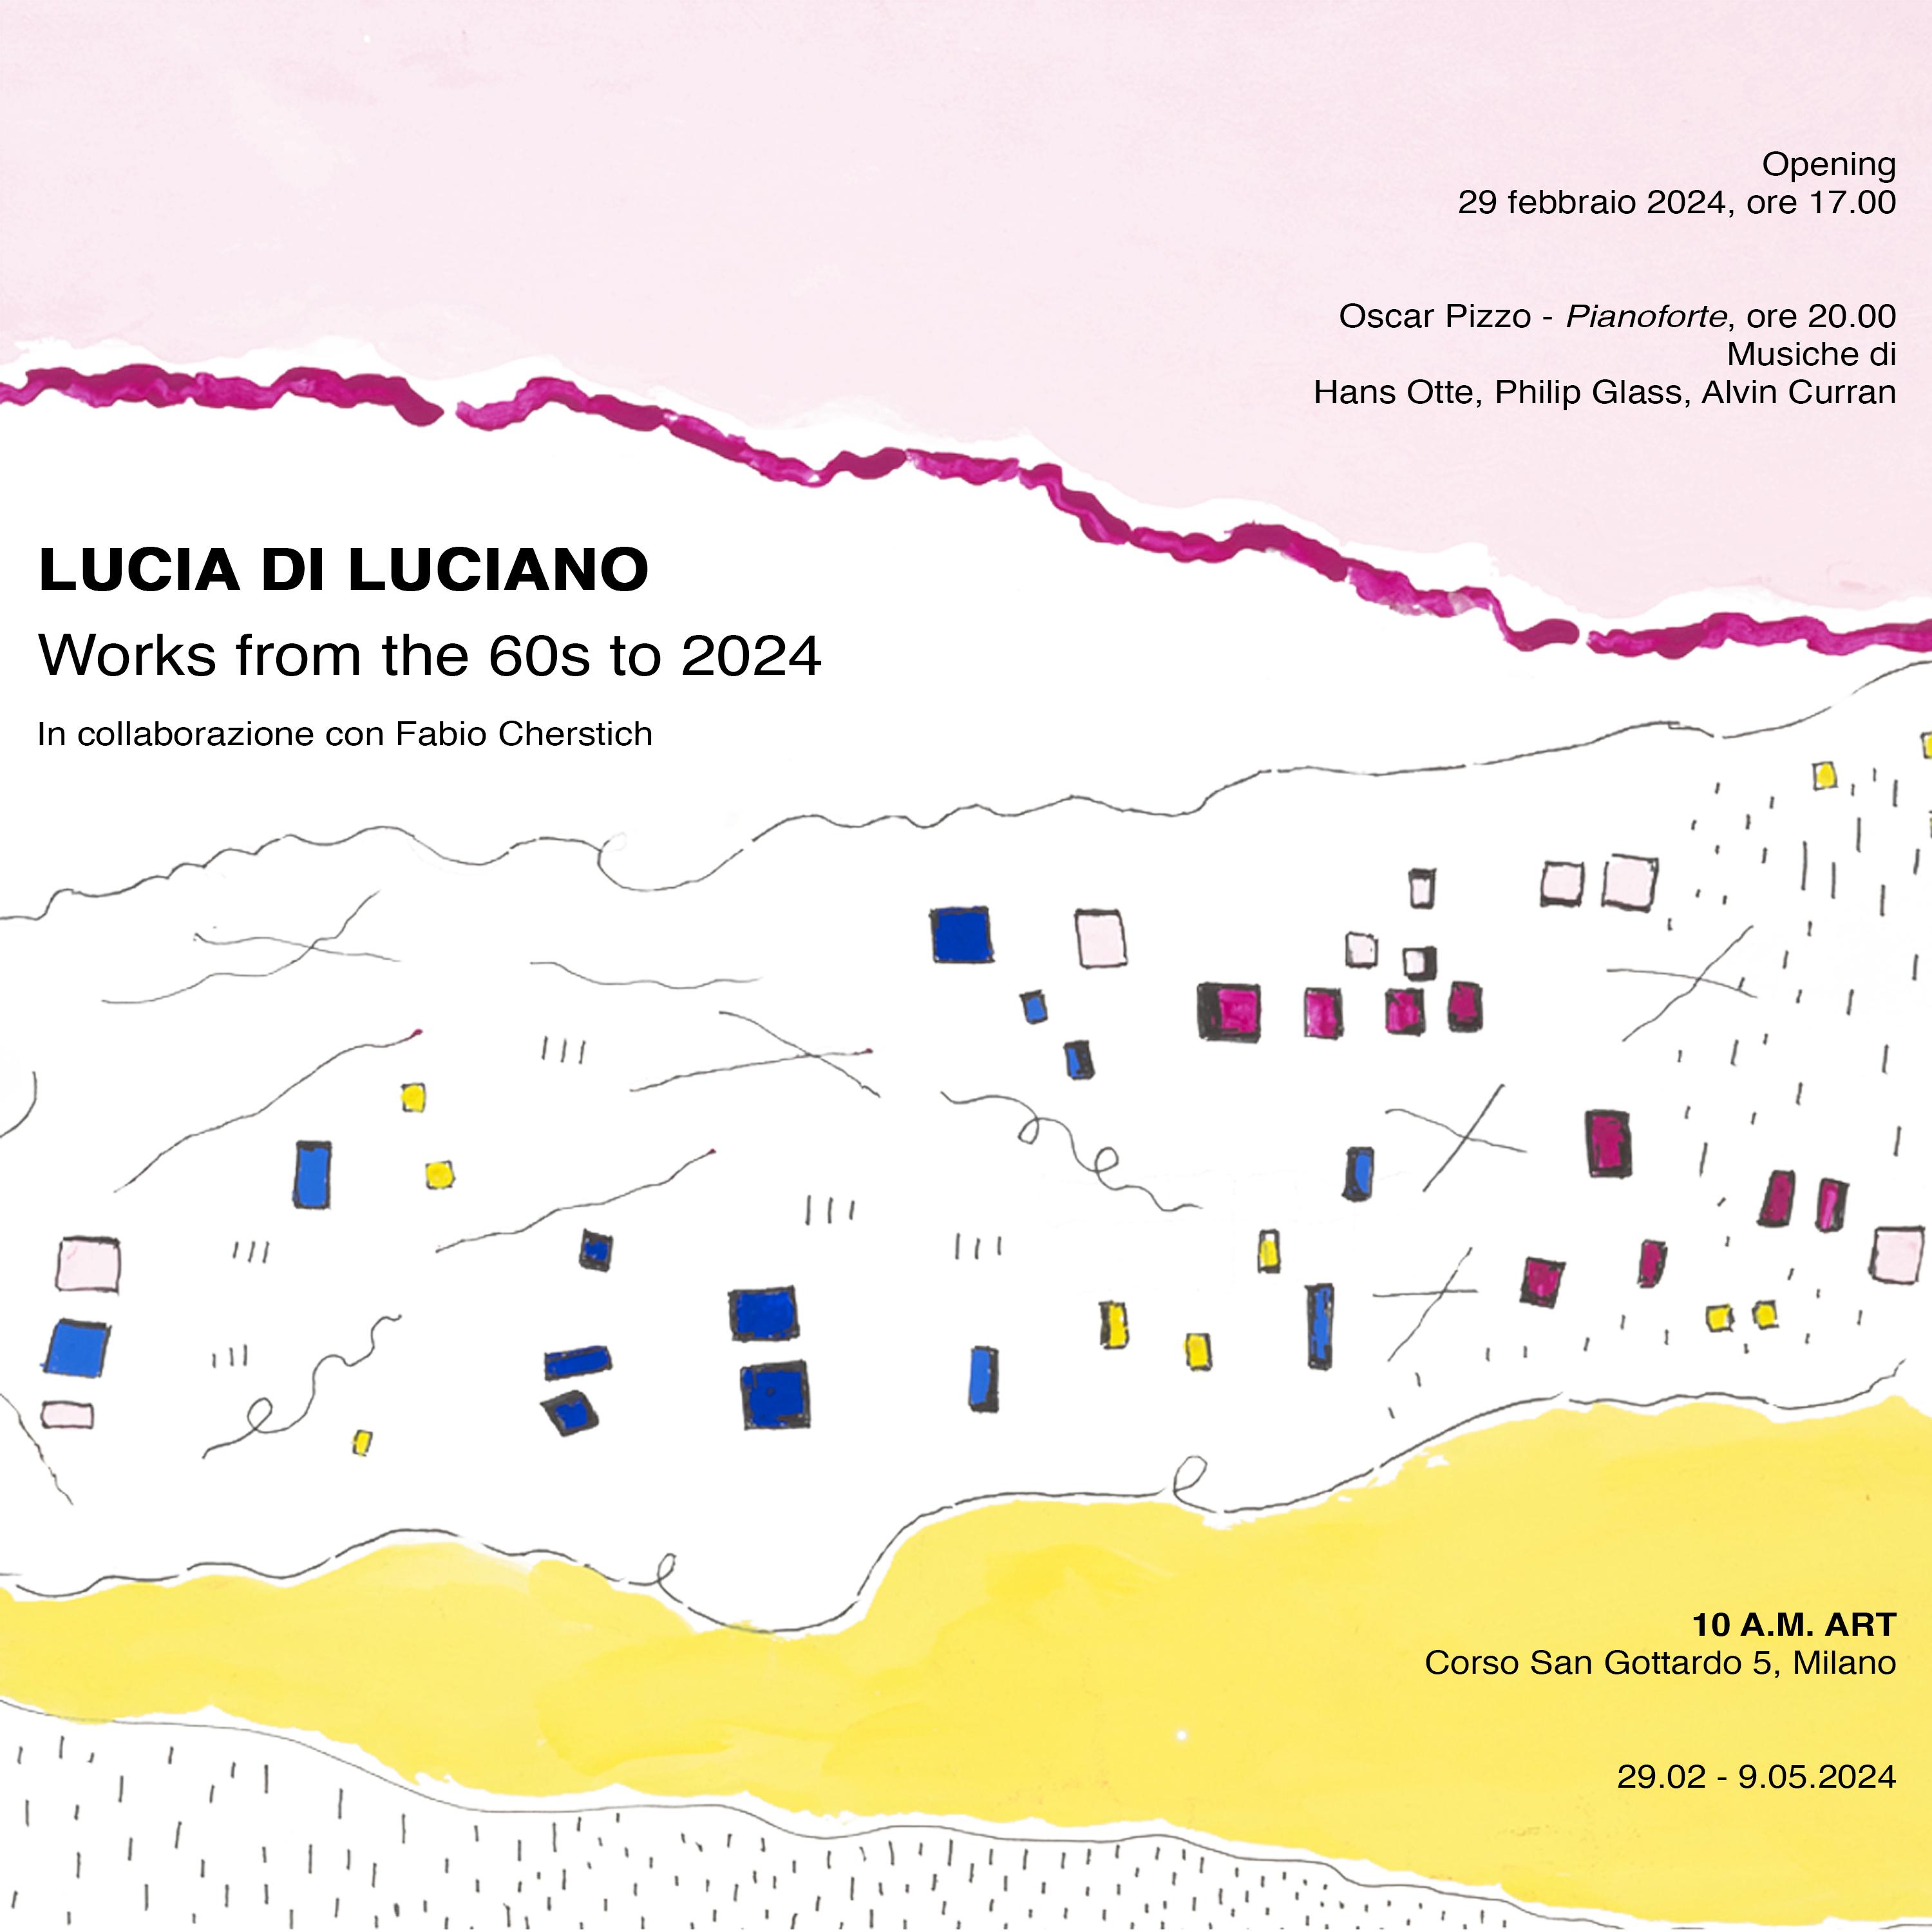 Lucia Di Luciano. Works from the 60s to 2024